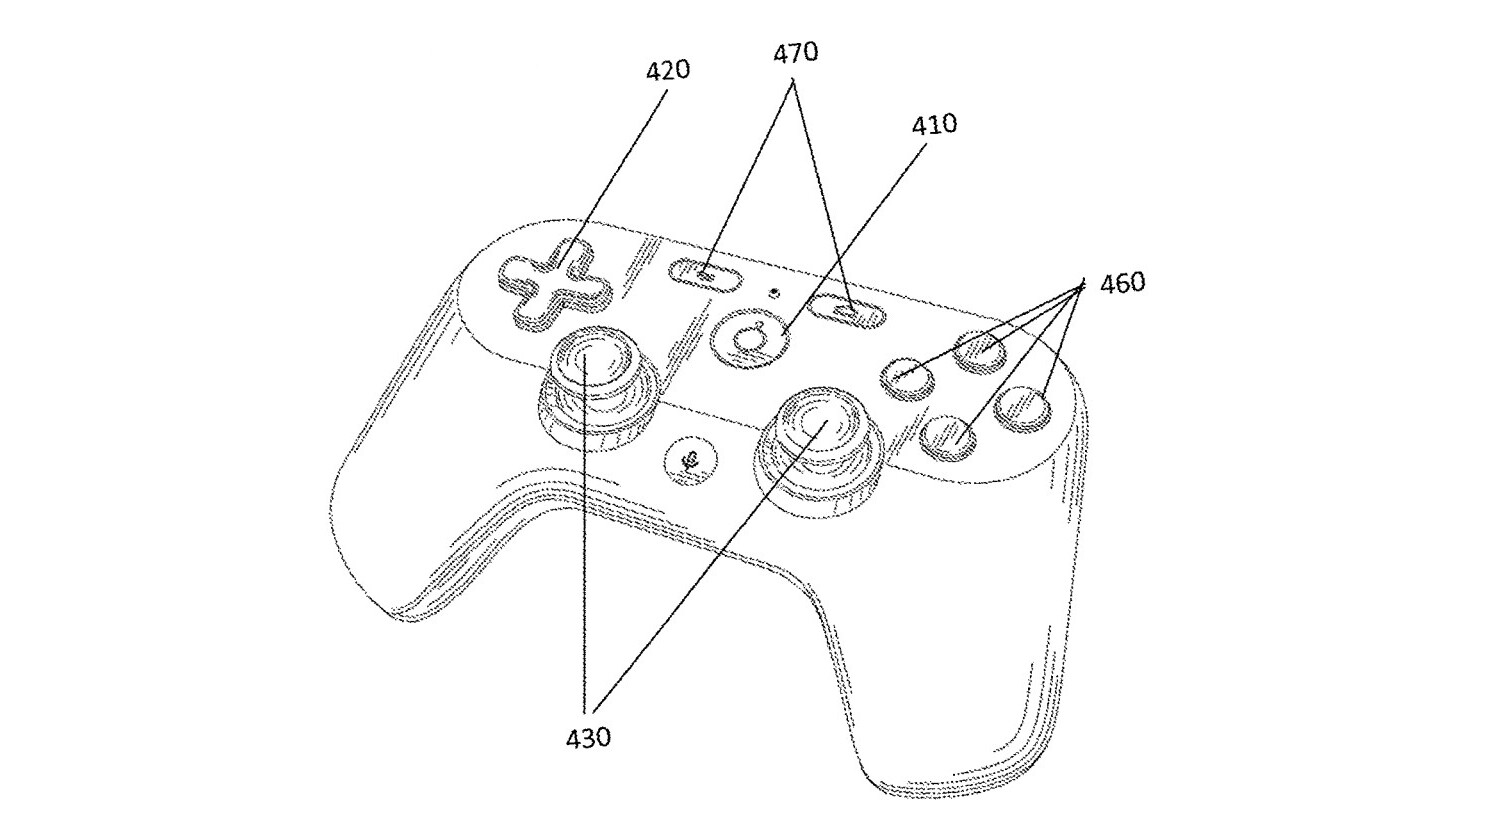 Google’s gamepad patent hints at its plans for Project Stream